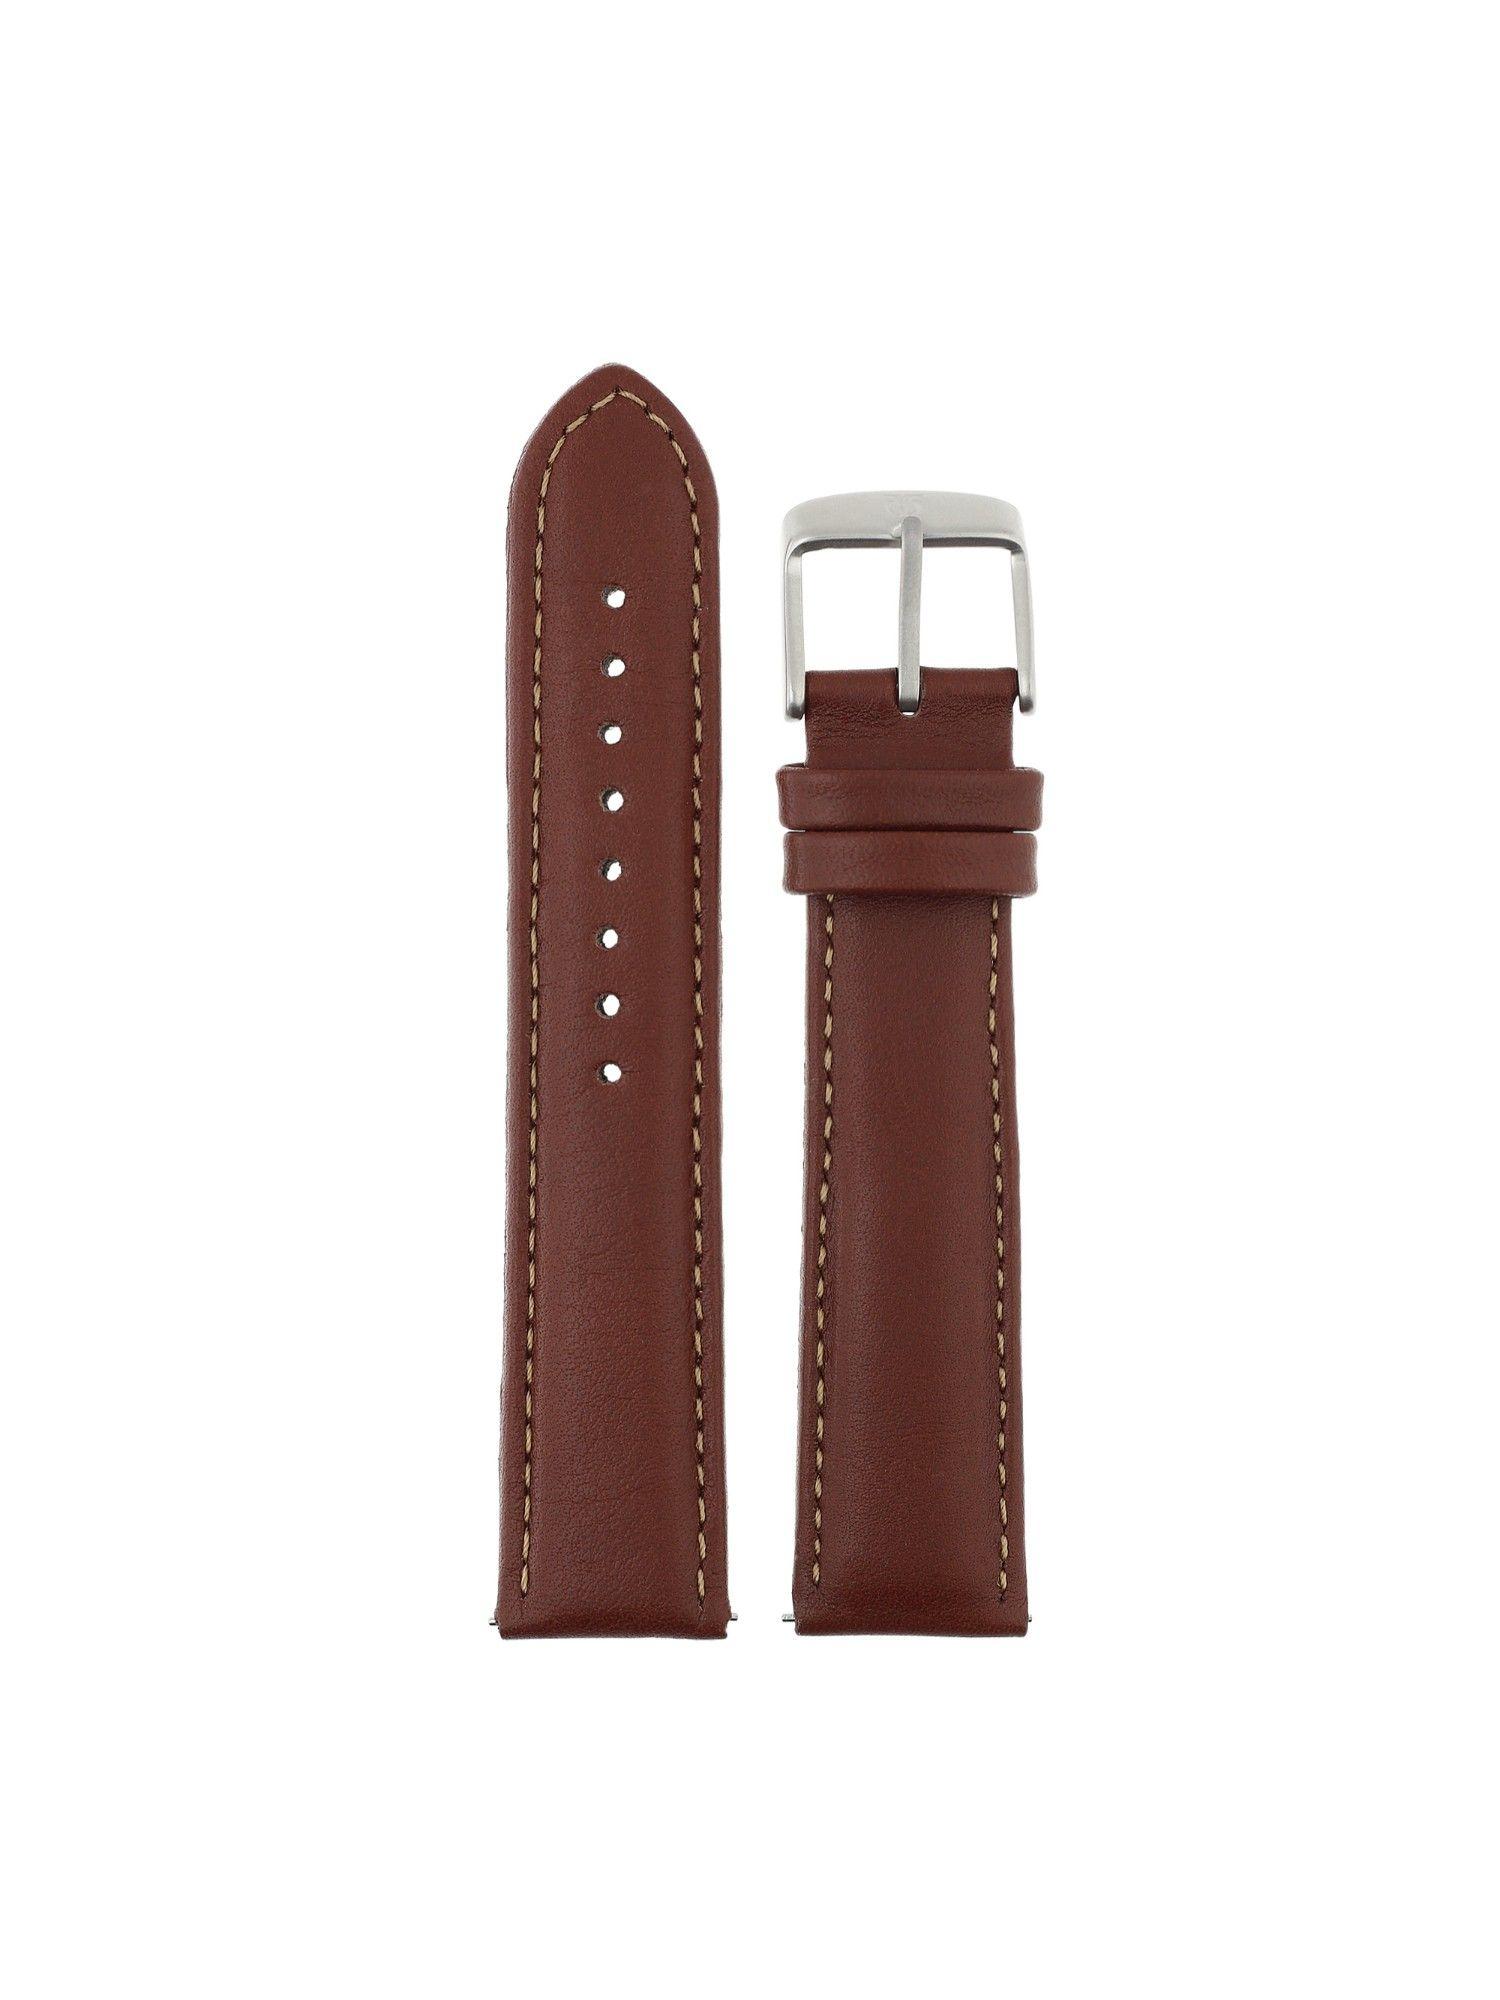 22-mm-brown-genuine-leather-strap-for-men-nf107017522sq-p